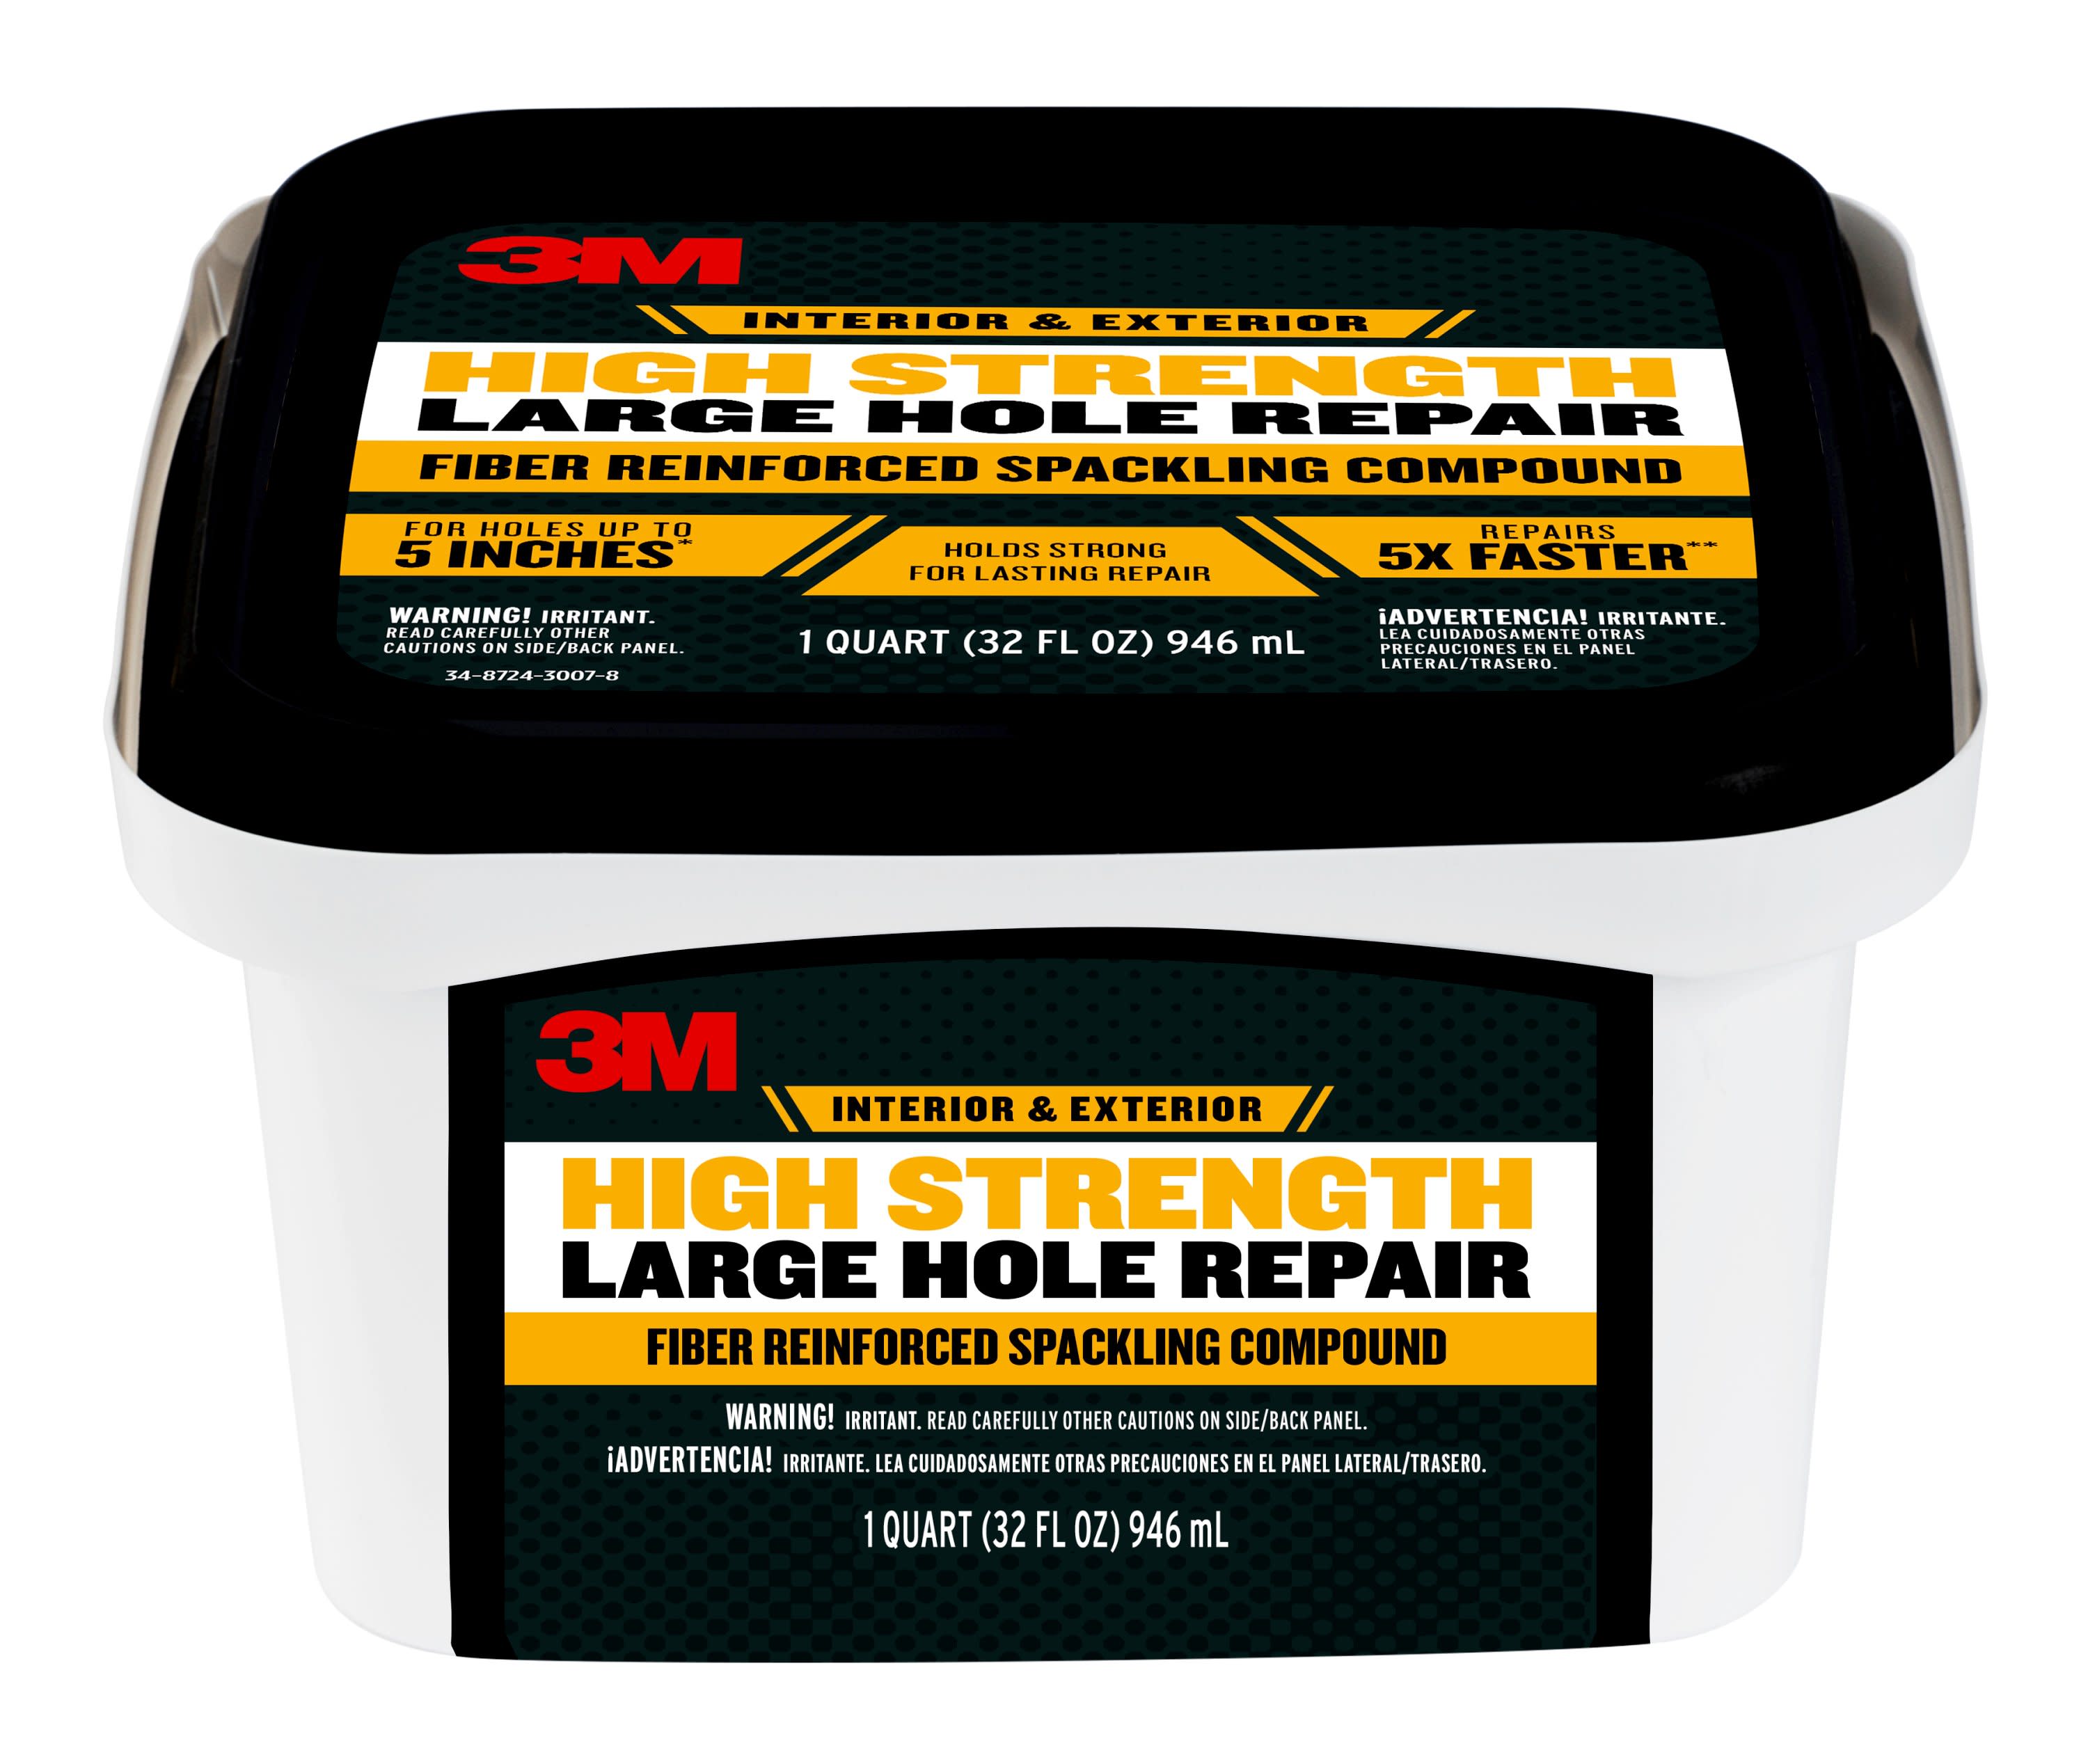 SIMPLE STEPS FOR REPAIRING HOLES WITH 3M WALL REPAIR TOOLS